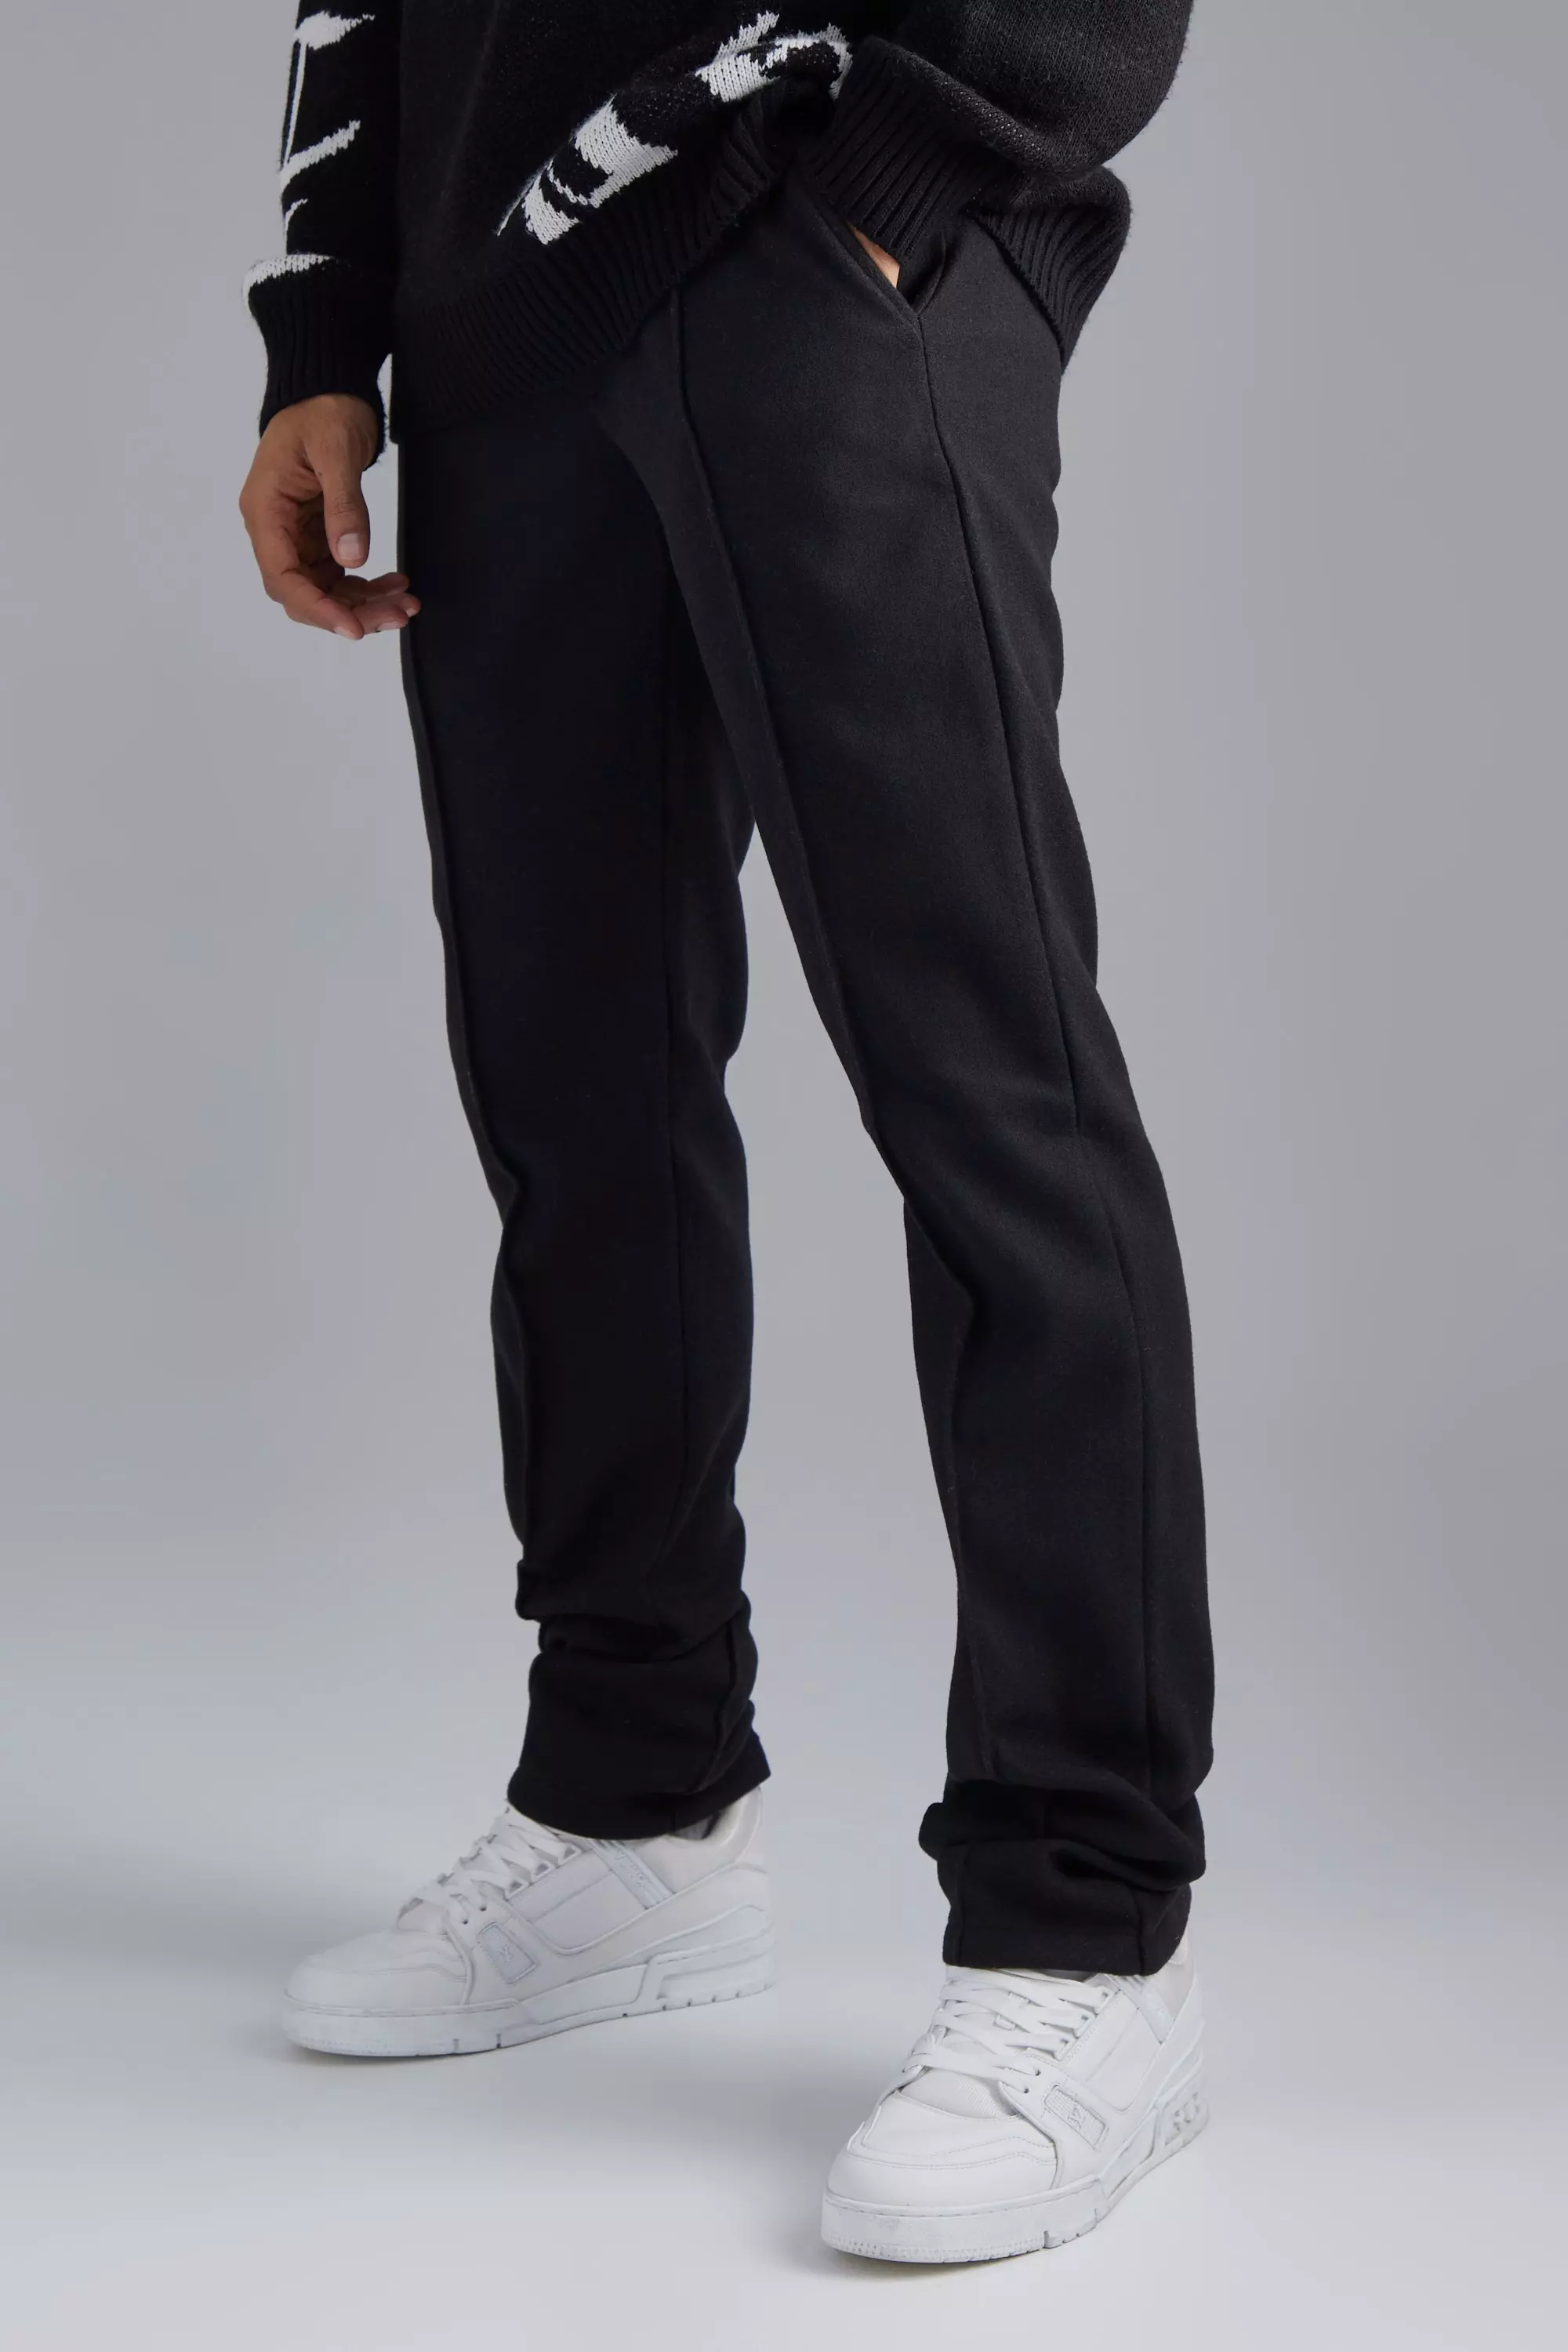 Fixed Waist Straight Wool Look Stacked Pants Black